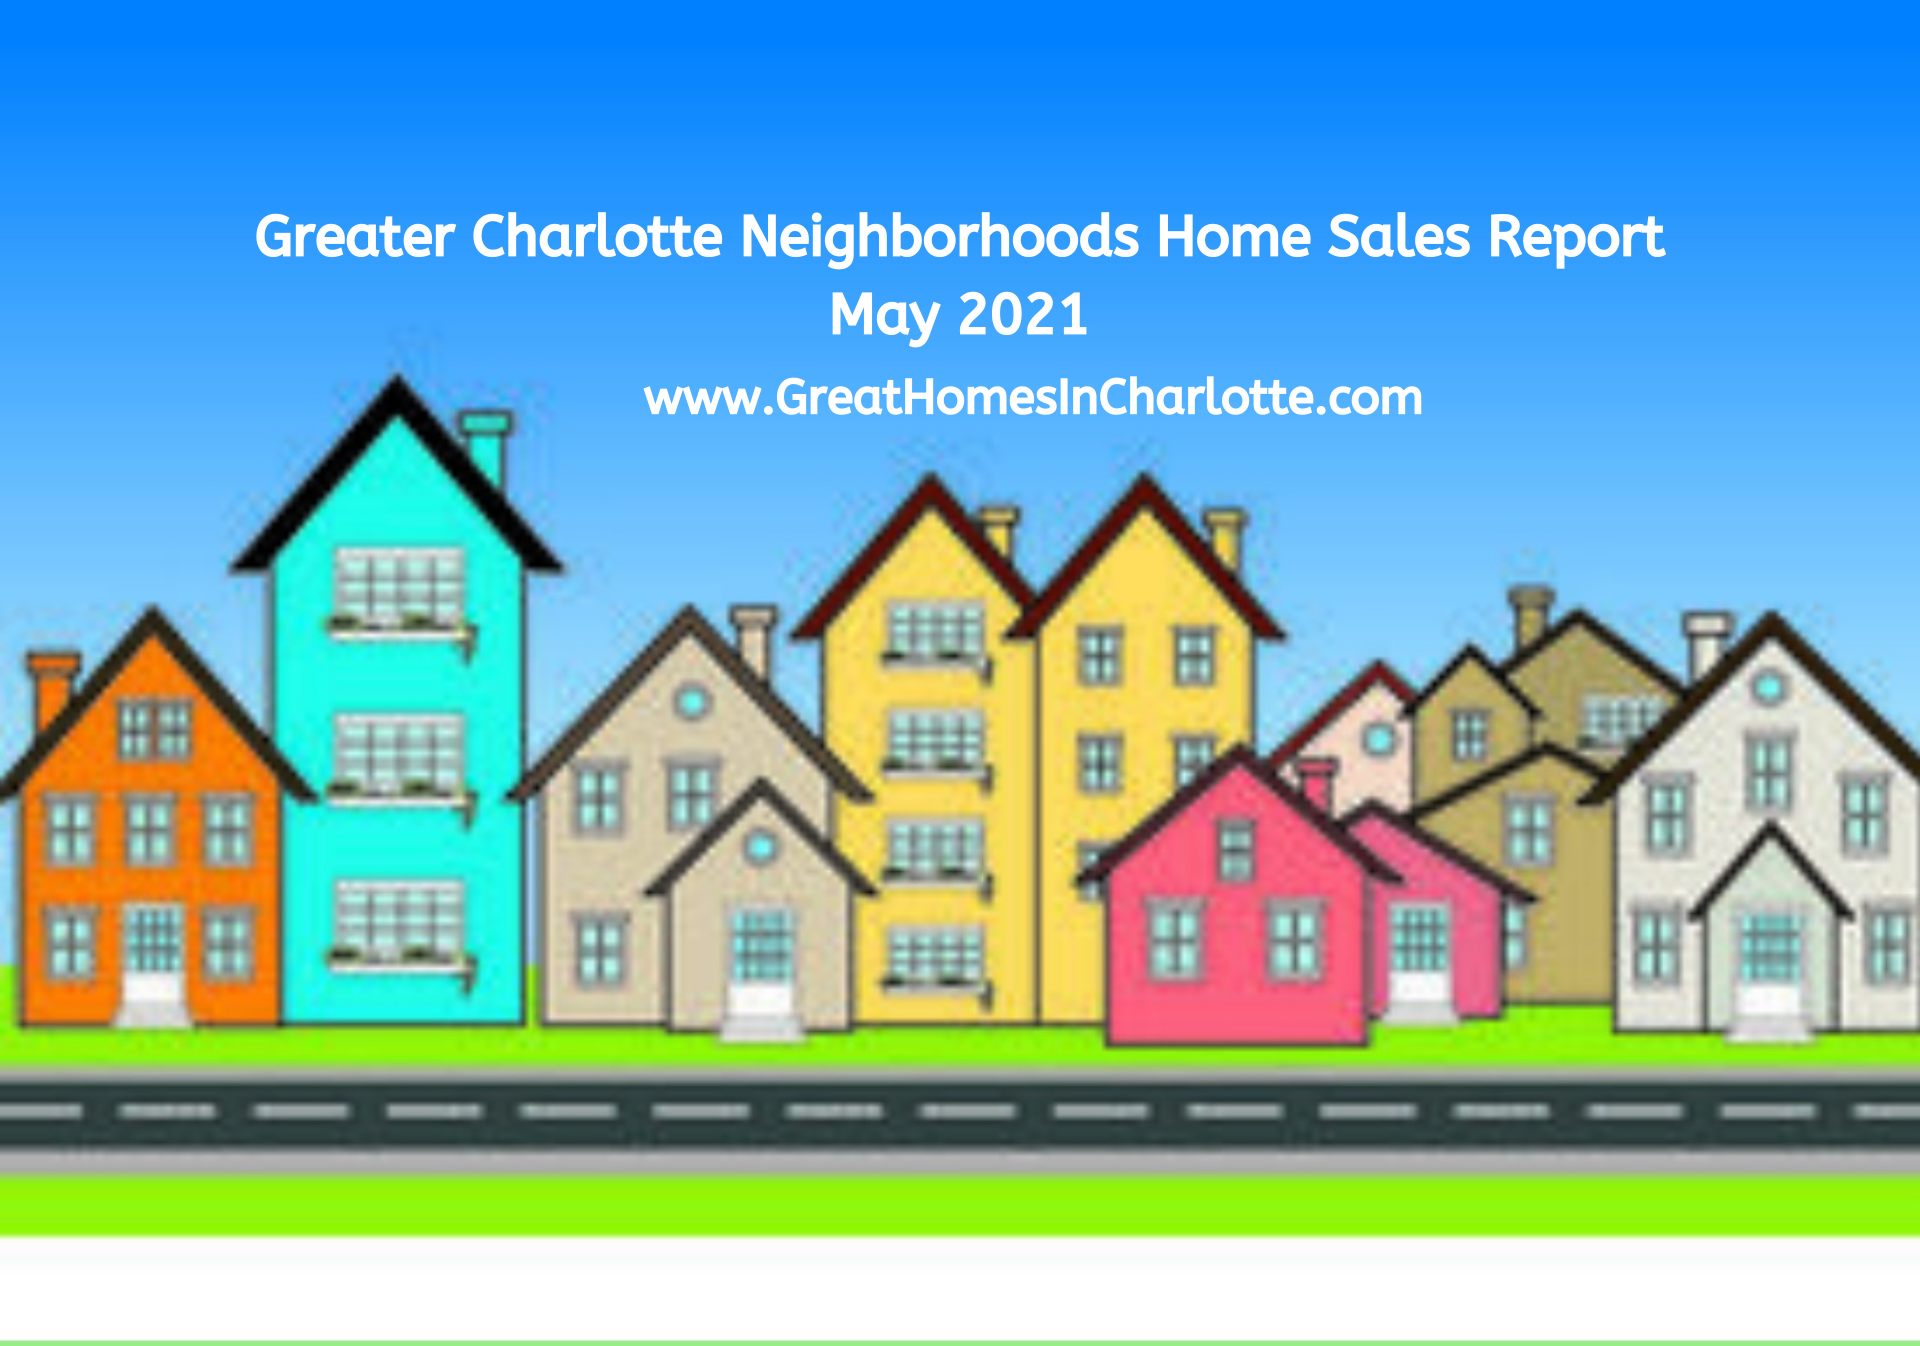 Home Sales Report For 500+ Greater Charlotte Neighborhoods May 2021